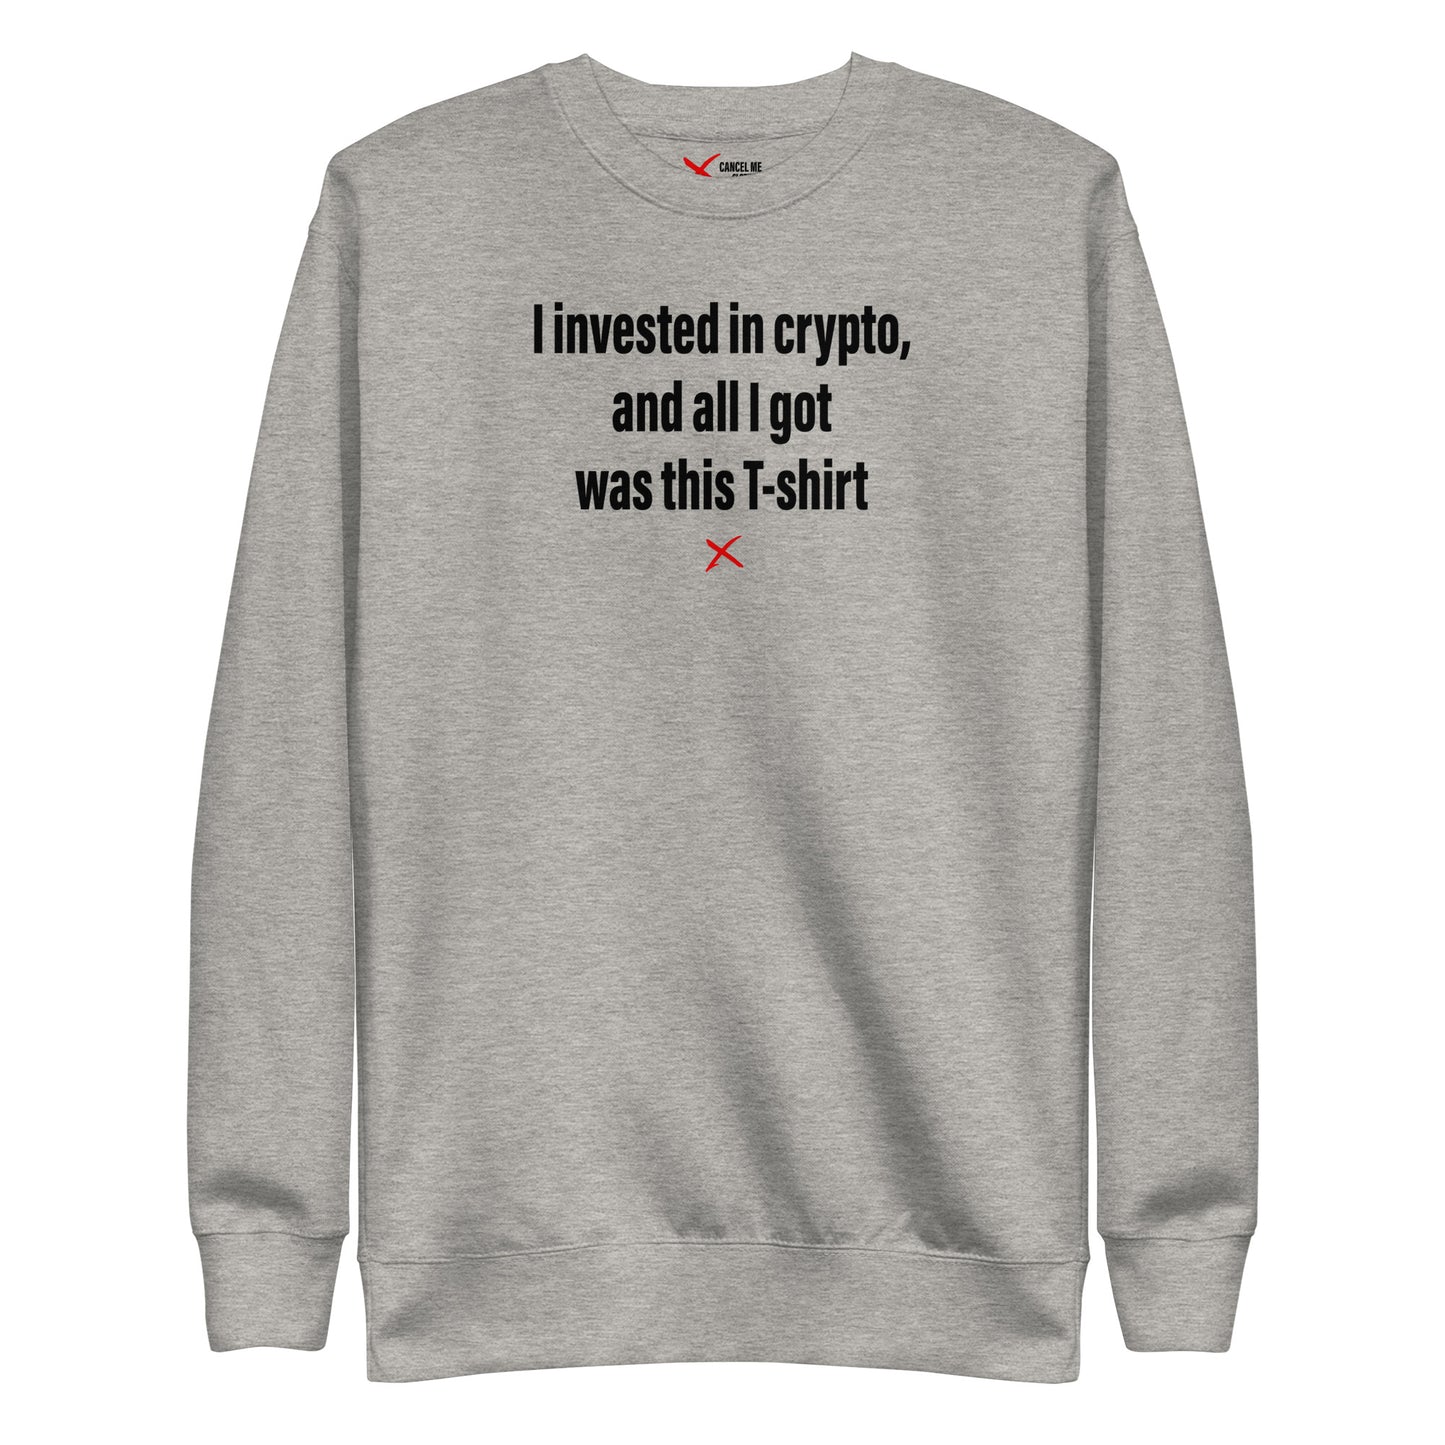 I invested in crypto, and all I got was this T-shirt - Sweatshirt